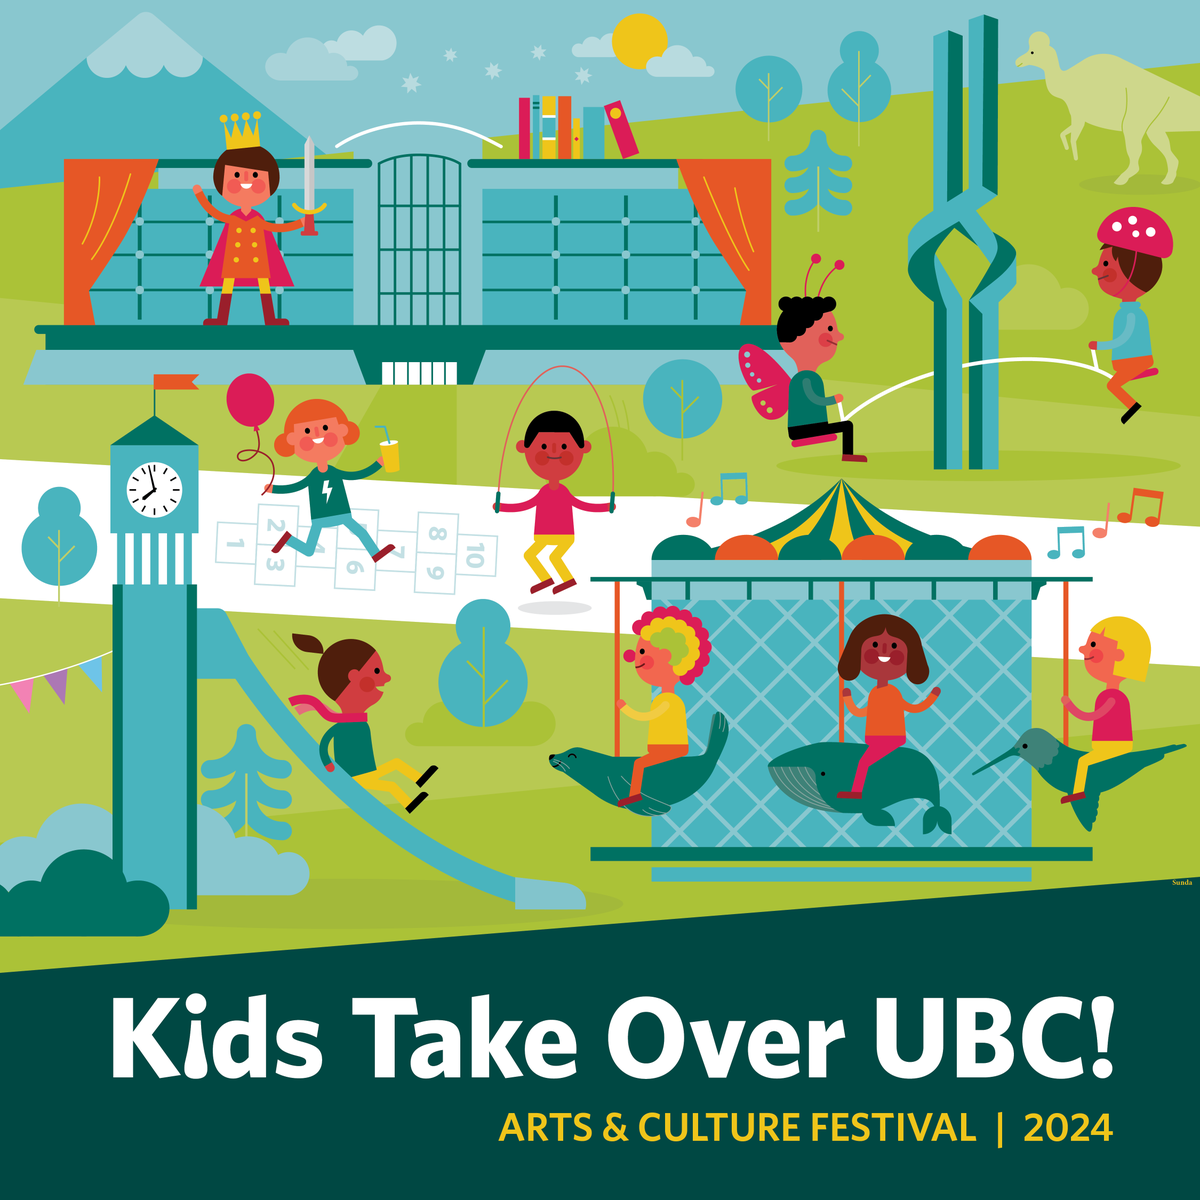 Celebrate Family Day at Kids Take Over UBC on February 18! Ticket sales are now open: ow.ly/Ycb550QtGIo